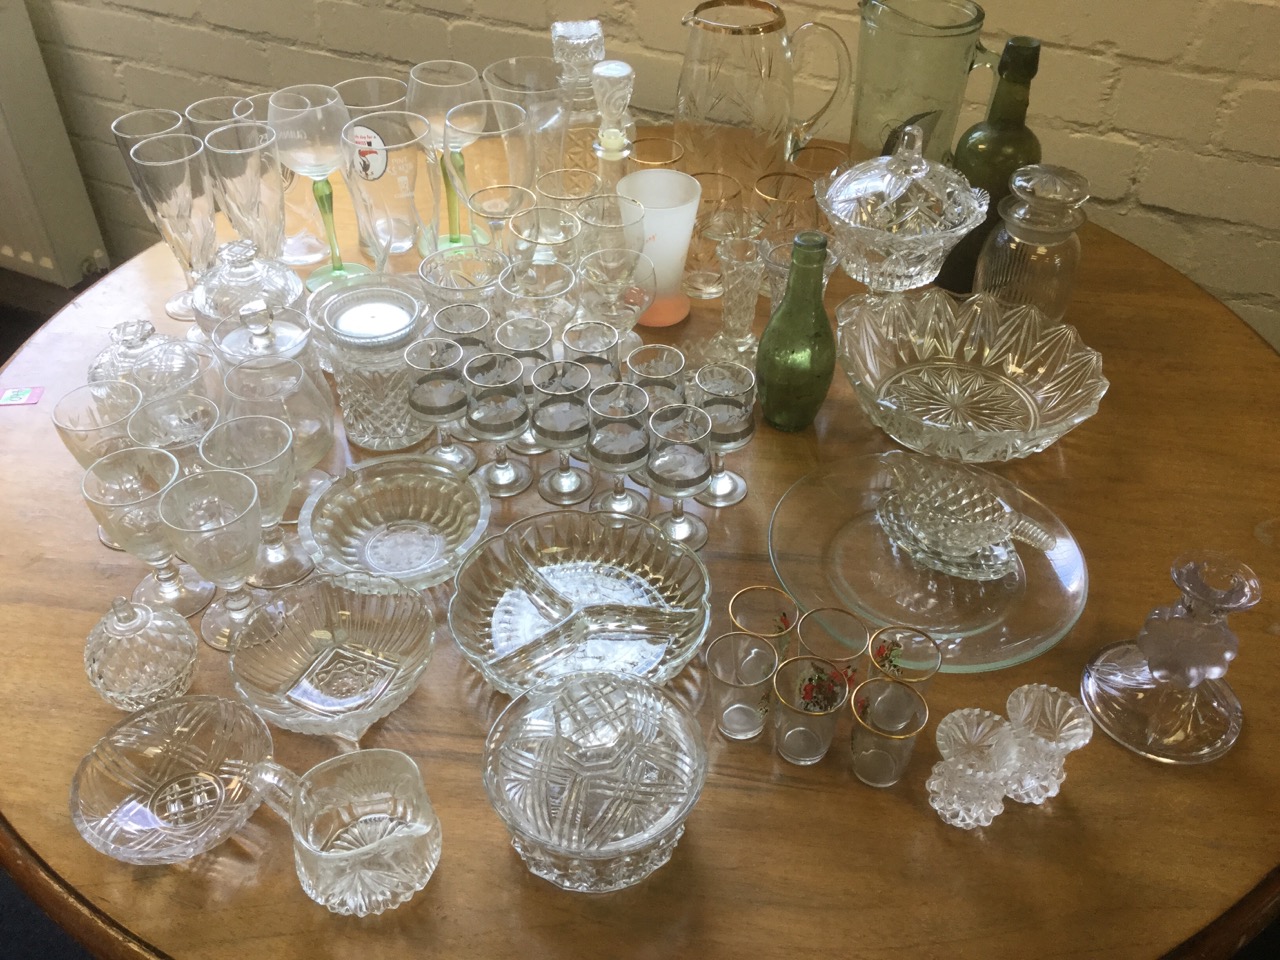 Miscellaneous glass including an Alnwick Brewery bottle, sets of glasses, fruit bowls, a - Image 2 of 6